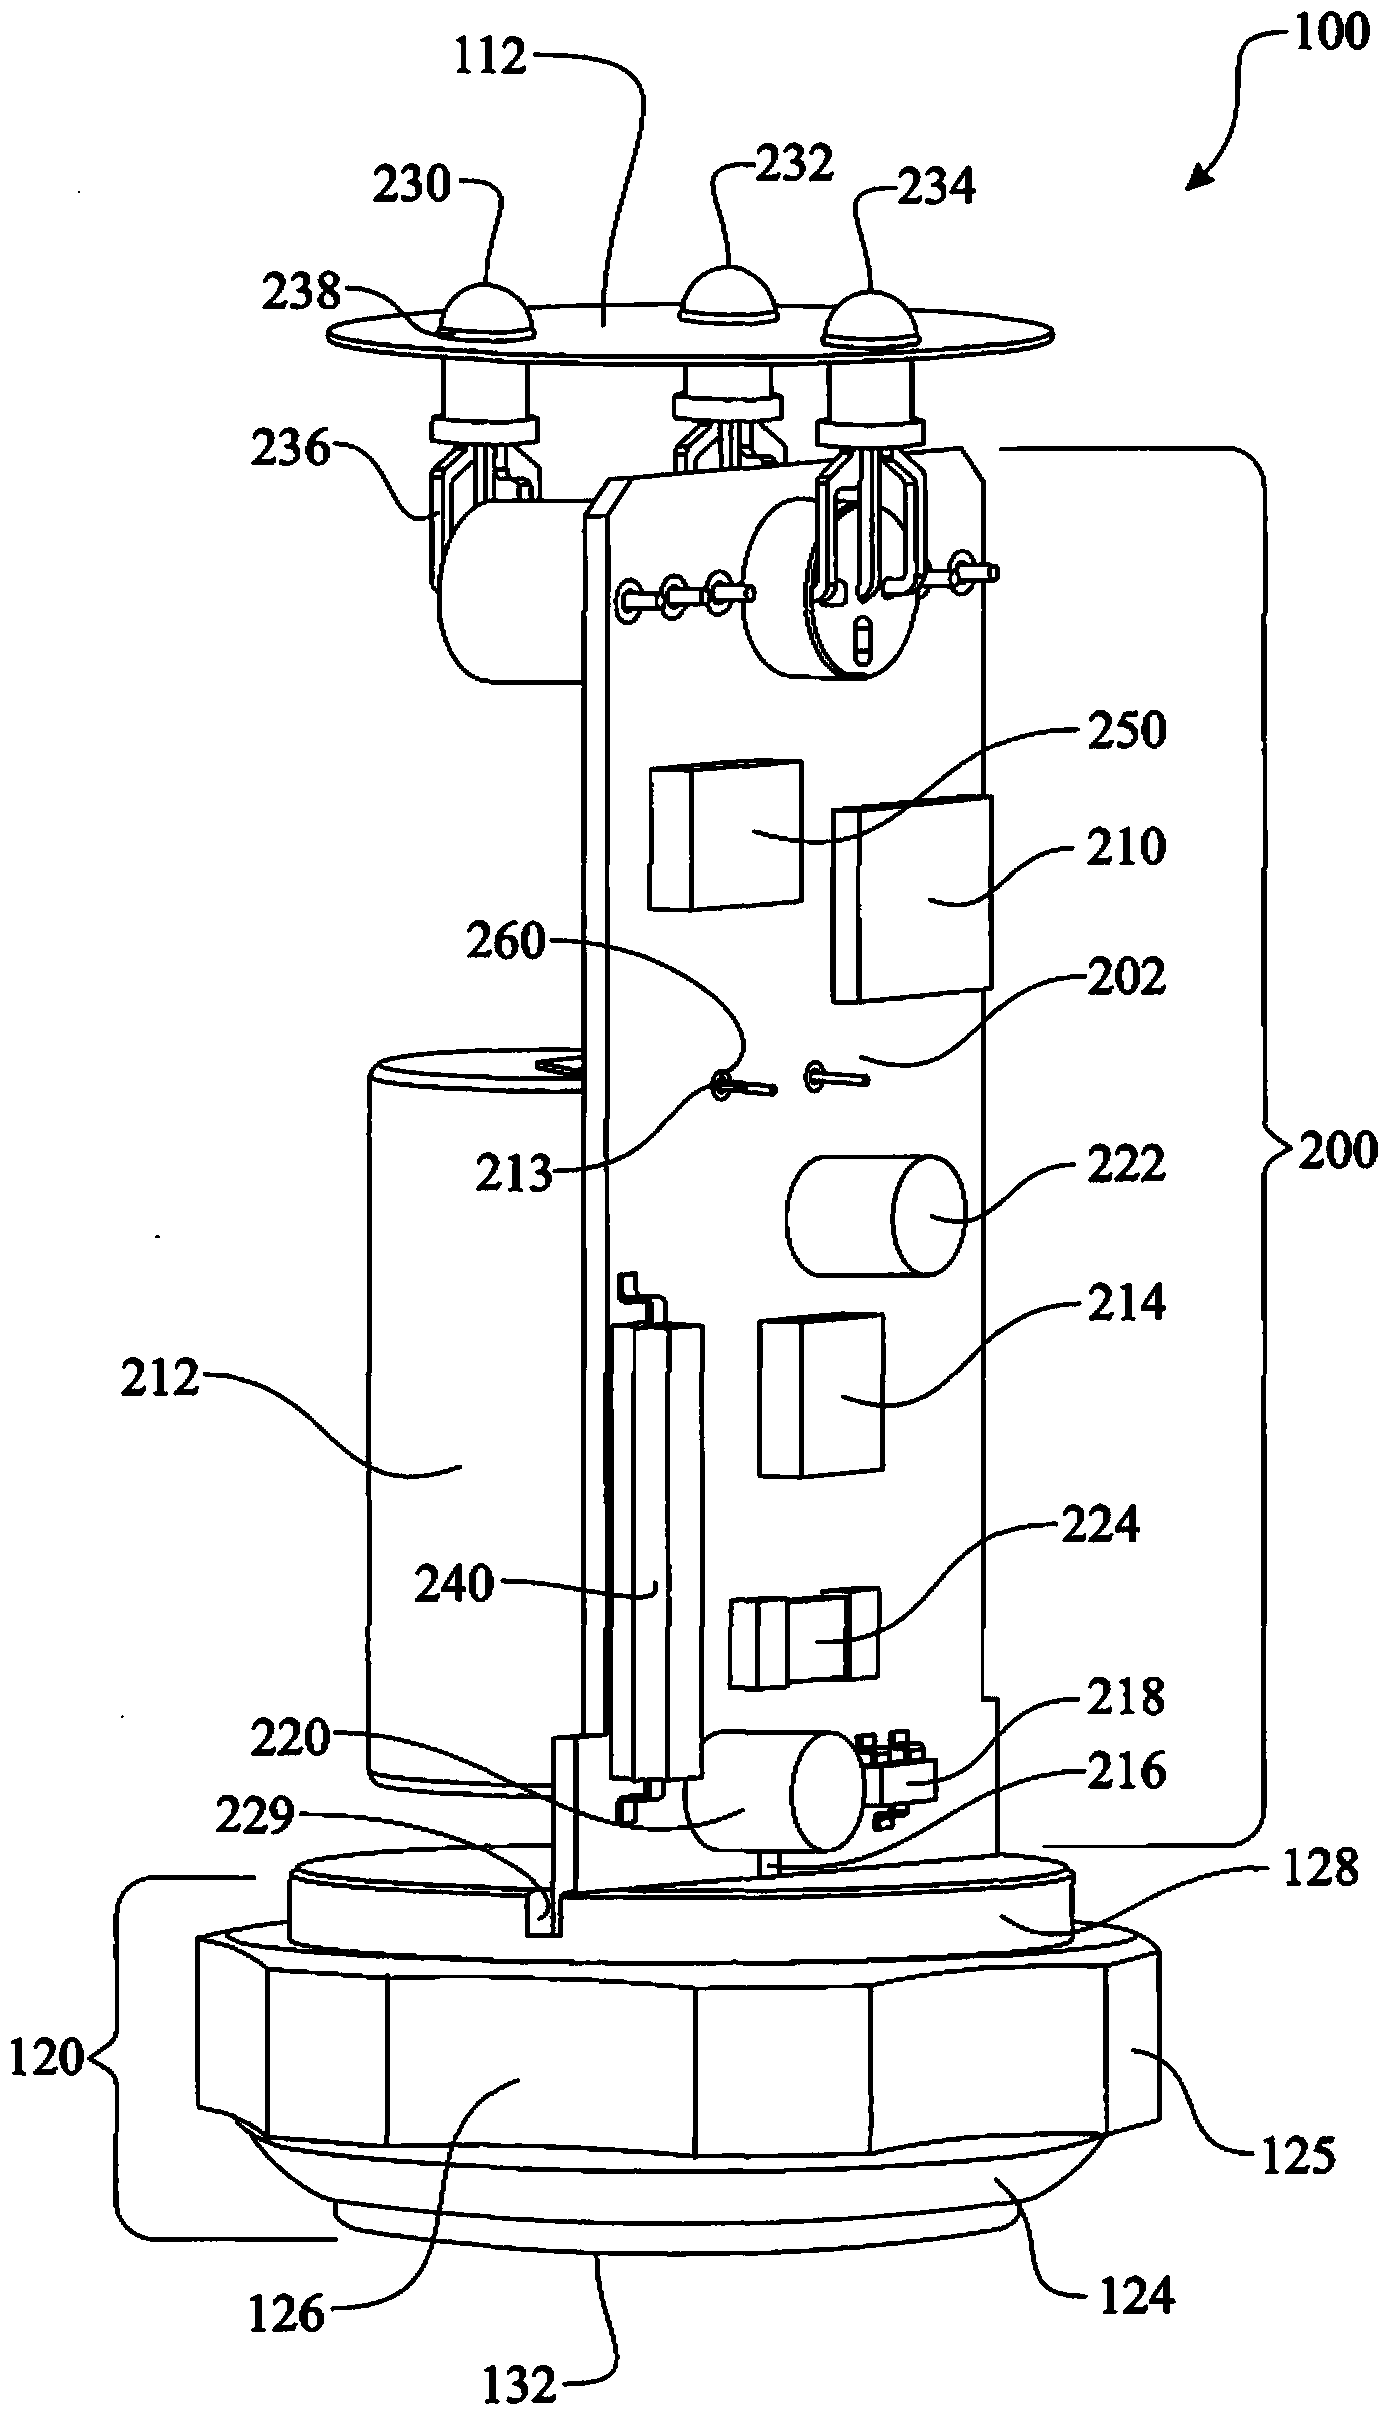 Method of monitoring health status of bearing with warning device in percentage mode